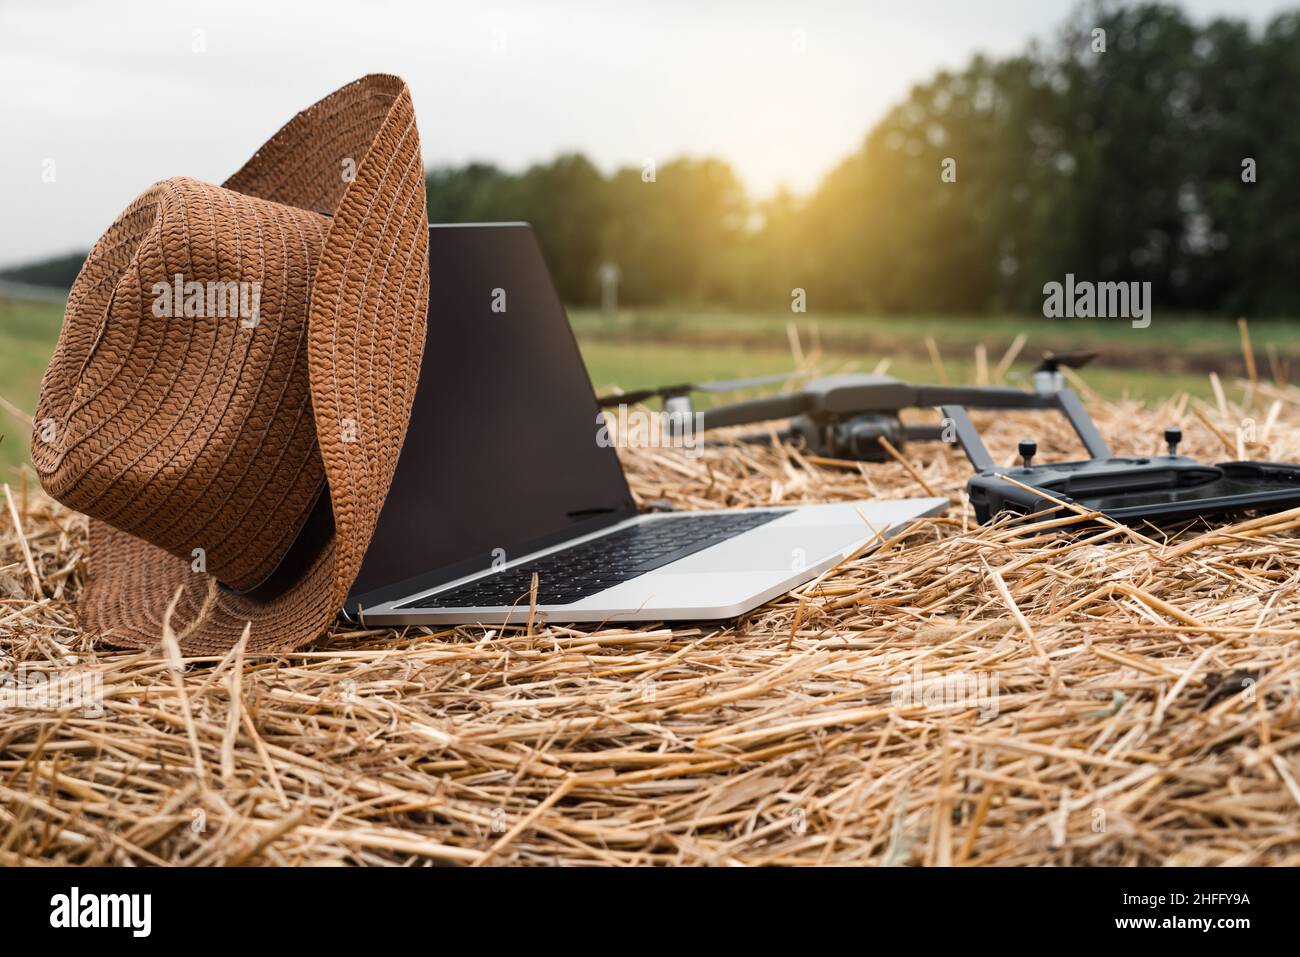 Laptop with cowboy hat and drone on the hay. Smart farming and agriculture digitalization Stock Photo